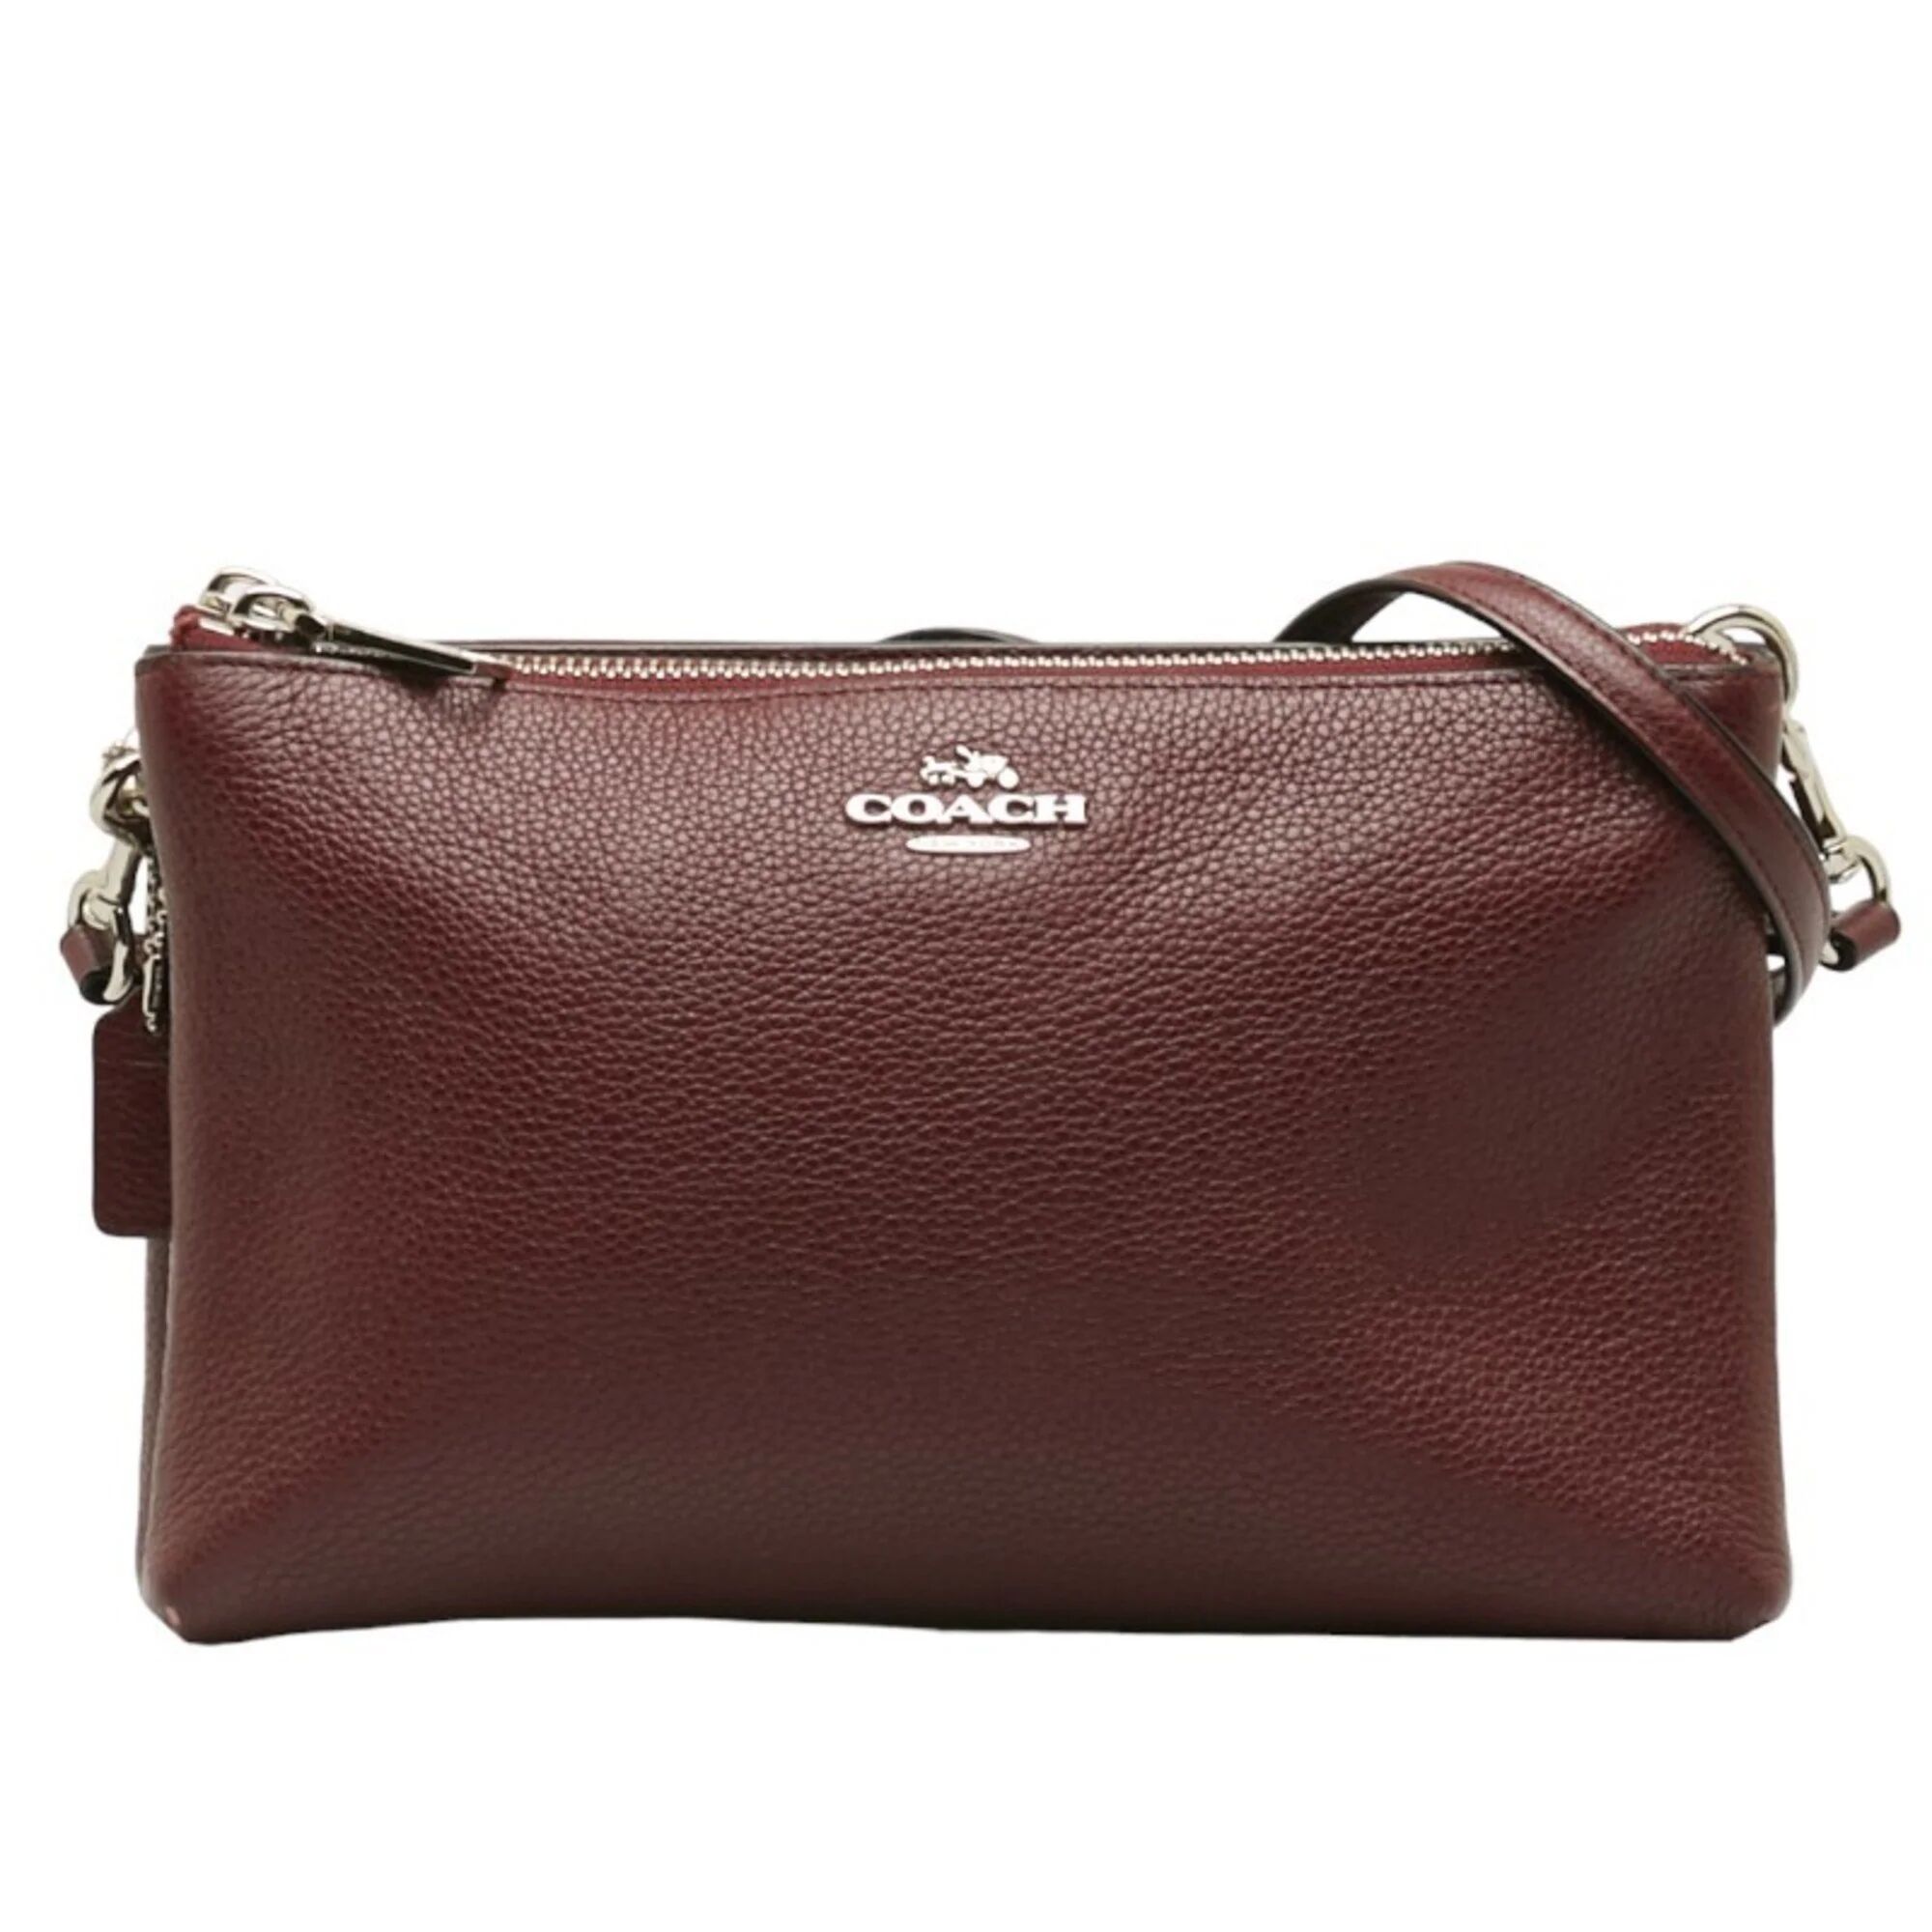 COACH shoulder bag wine red leather women's